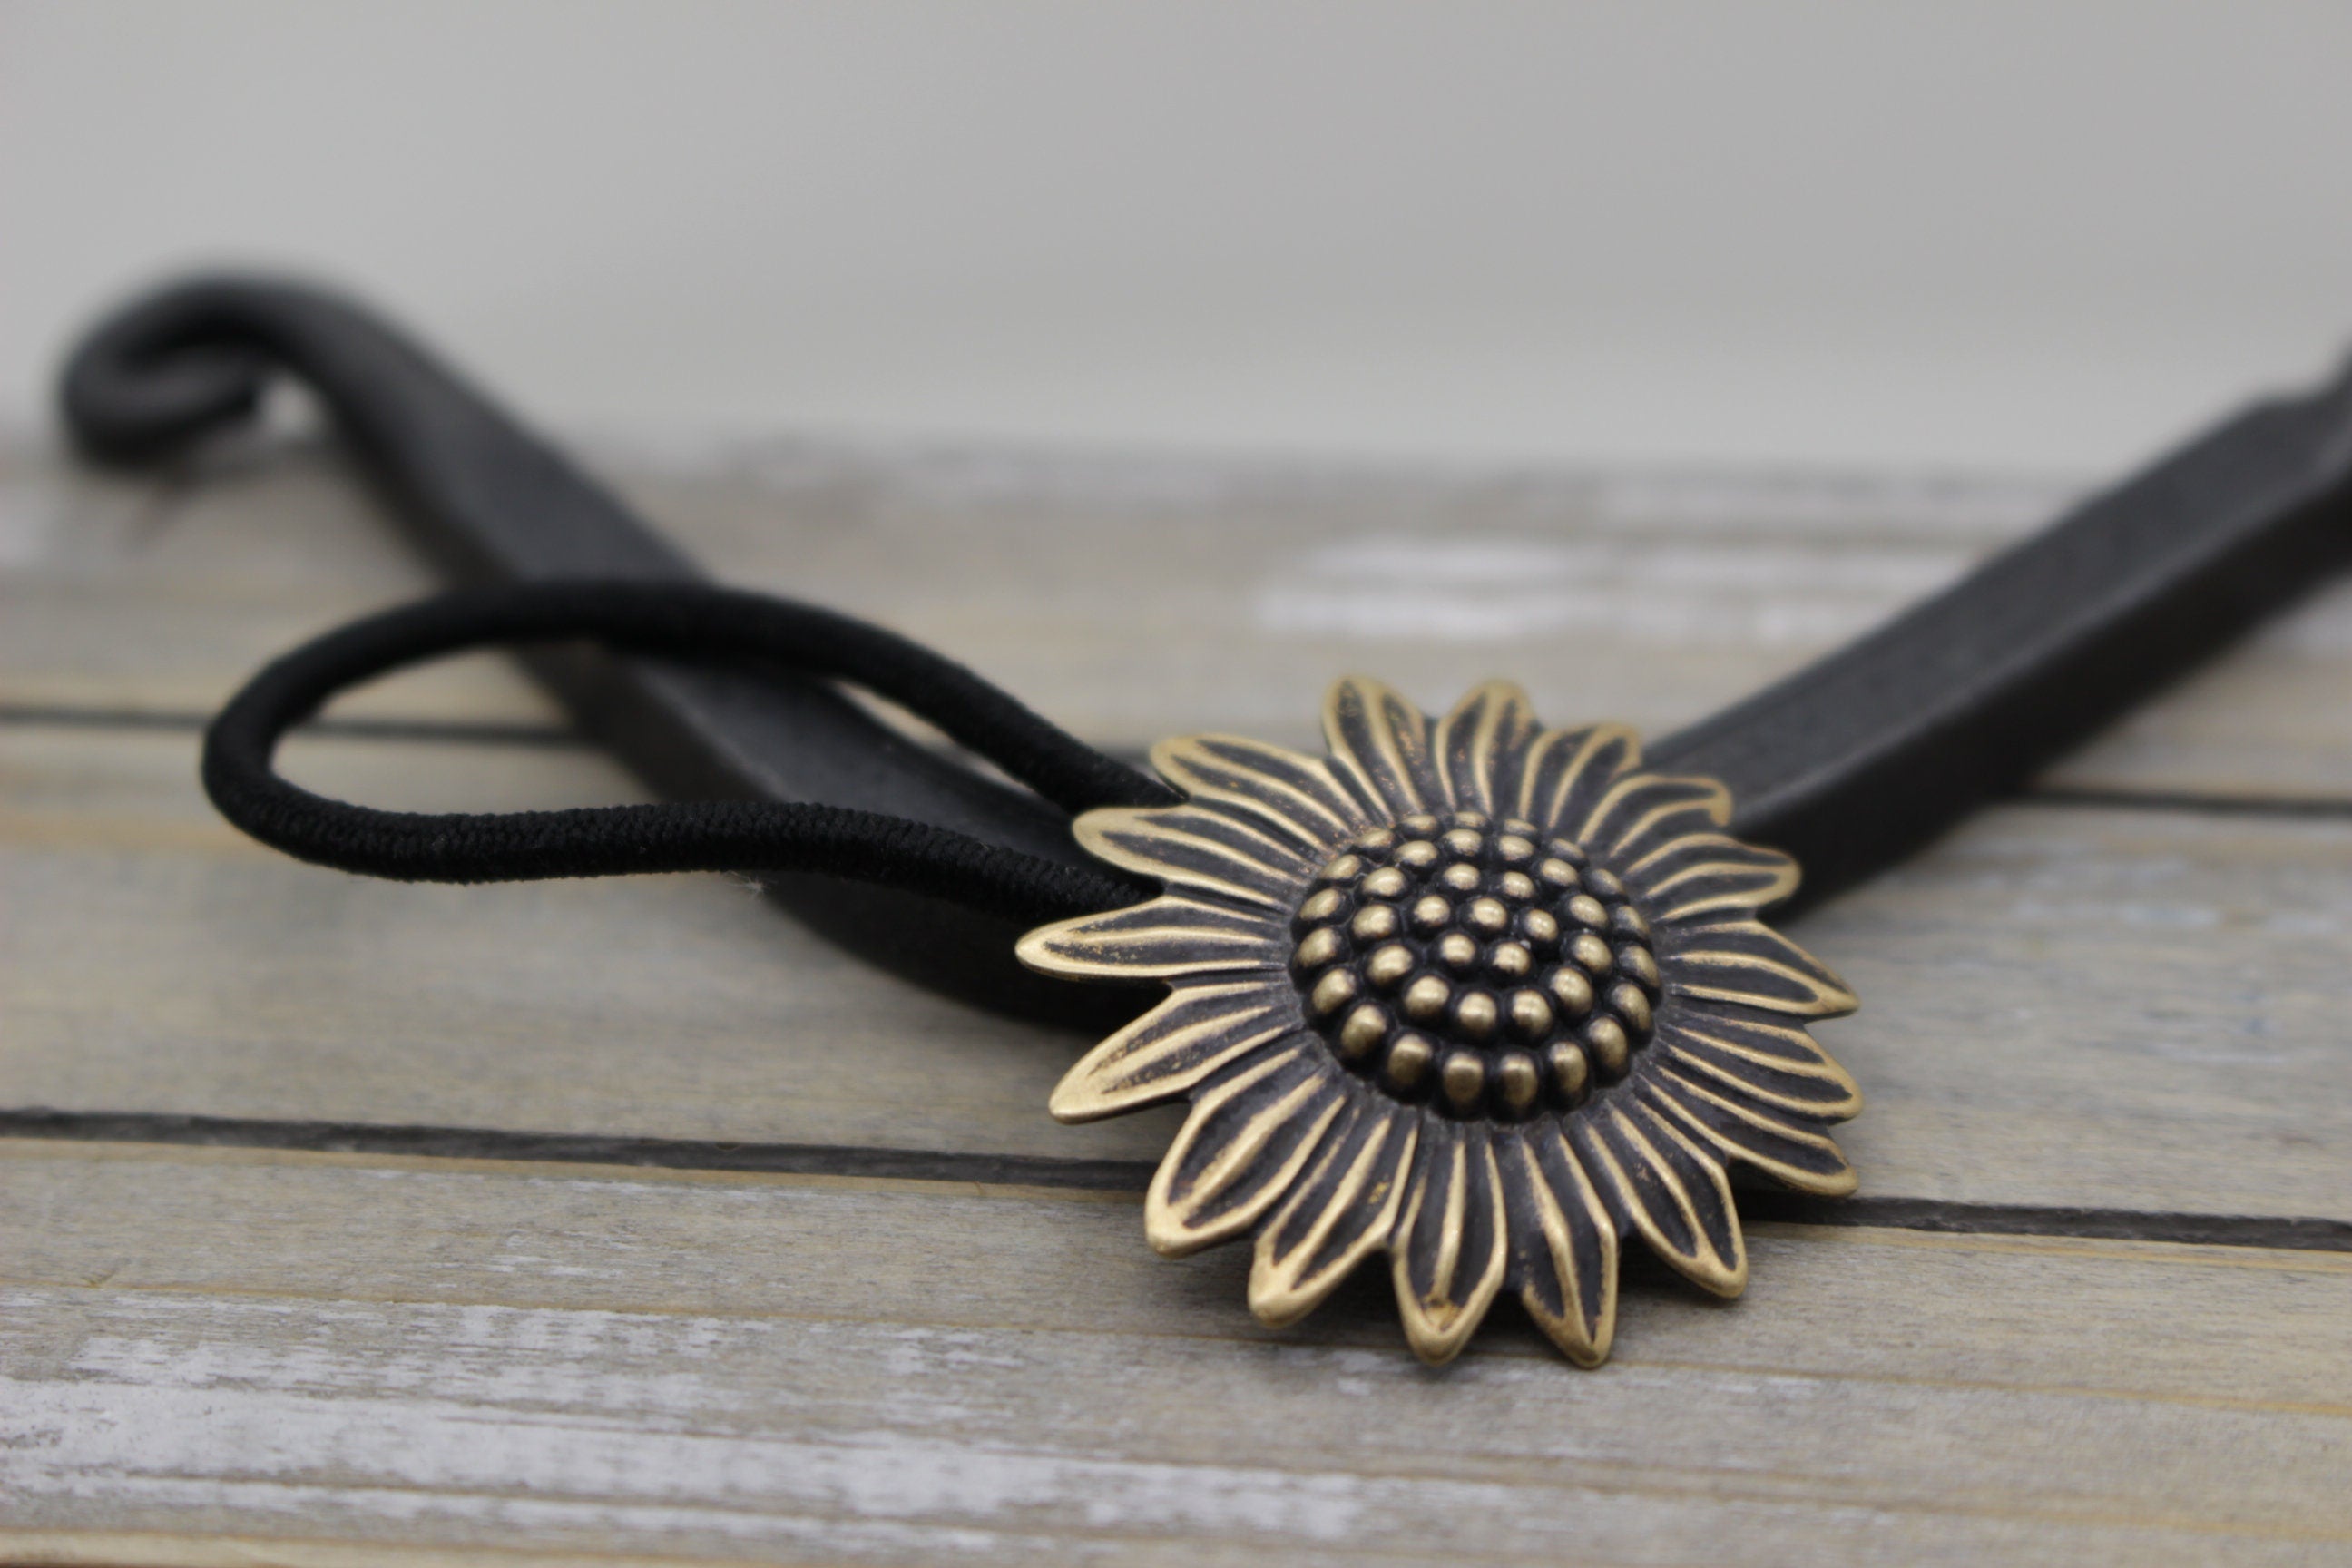 Sunflower Brass Hair tie - Hair elastic - Gift for her - hair accessory - hair jewelry - jewelry sale - tie elastic